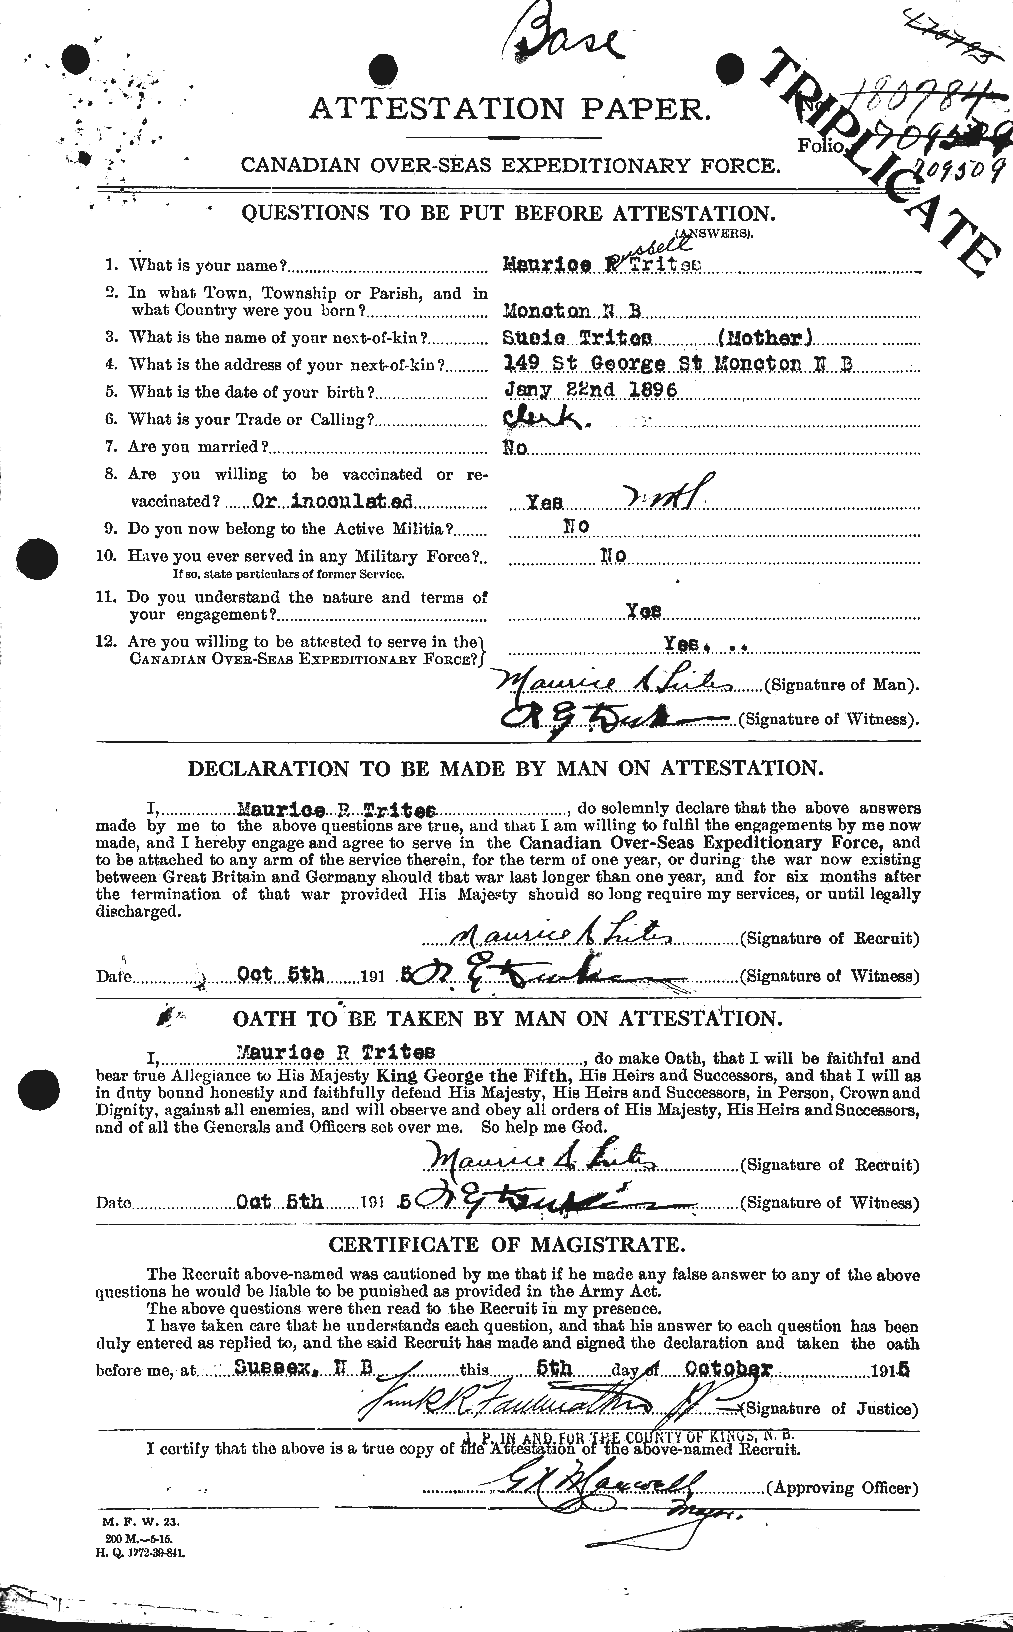 Personnel Records of the First World War - CEF 640157a